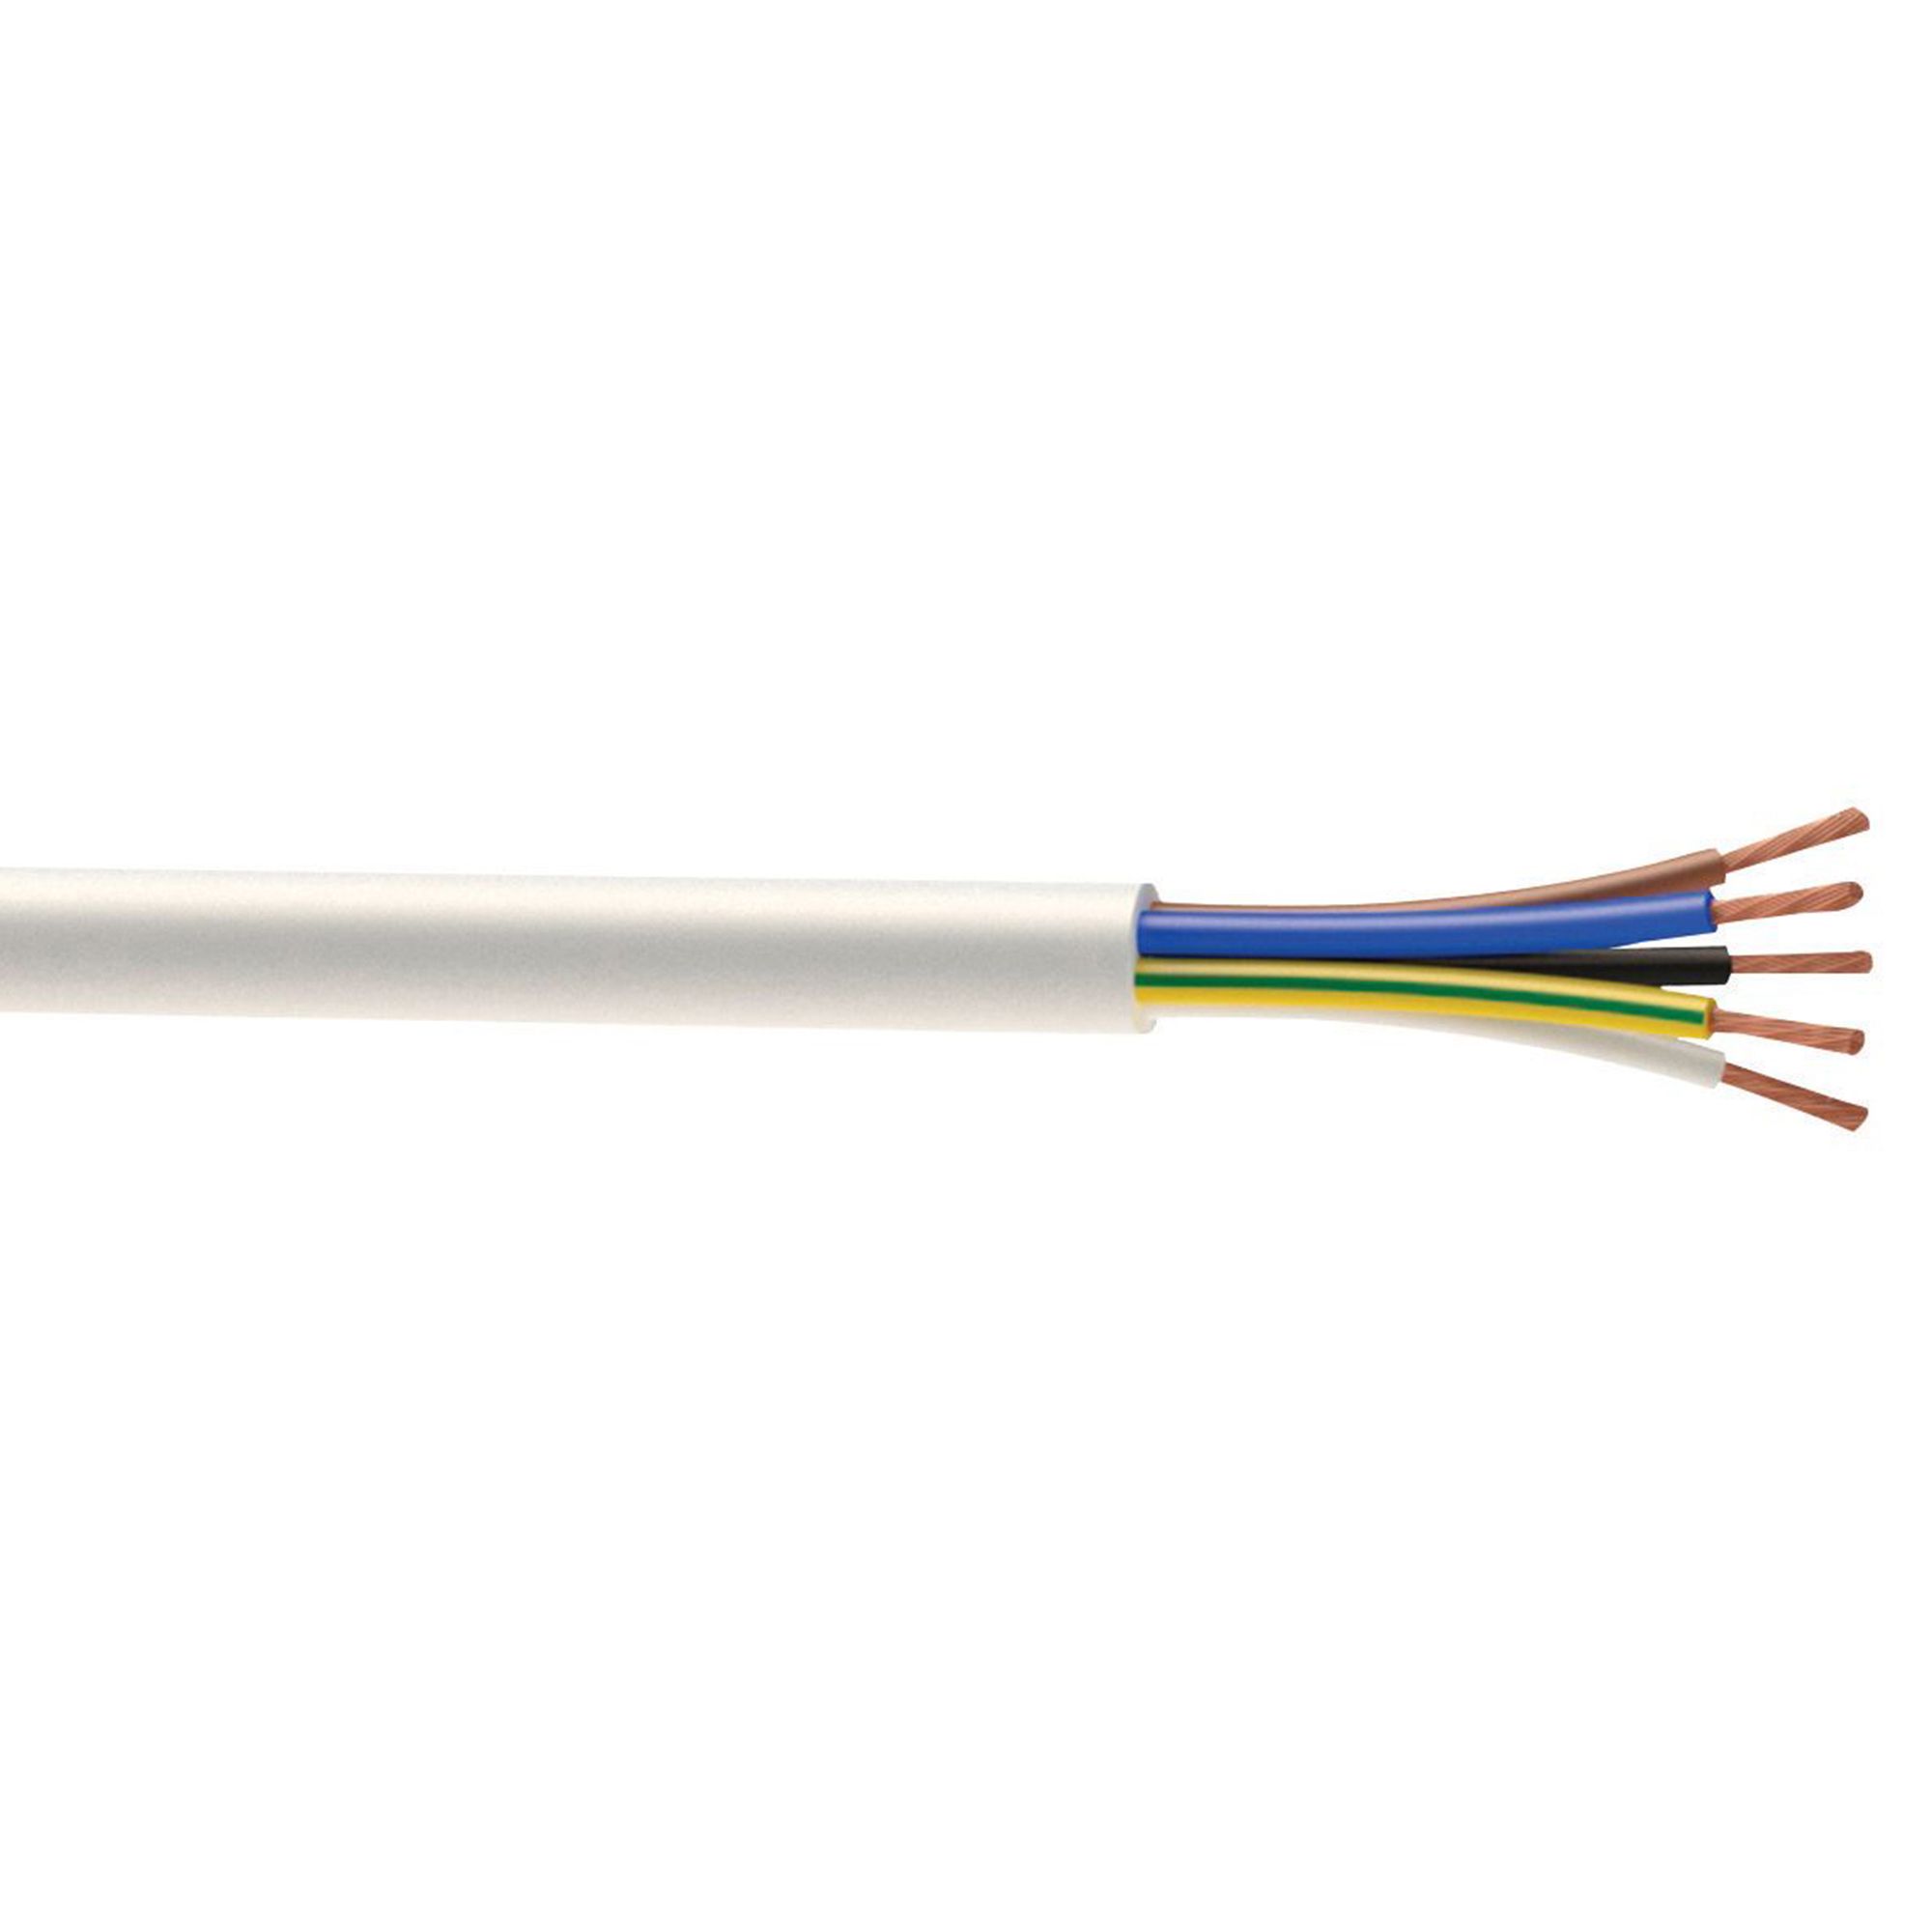 Time White 5-core Flexible Cable 1mm² x 5m